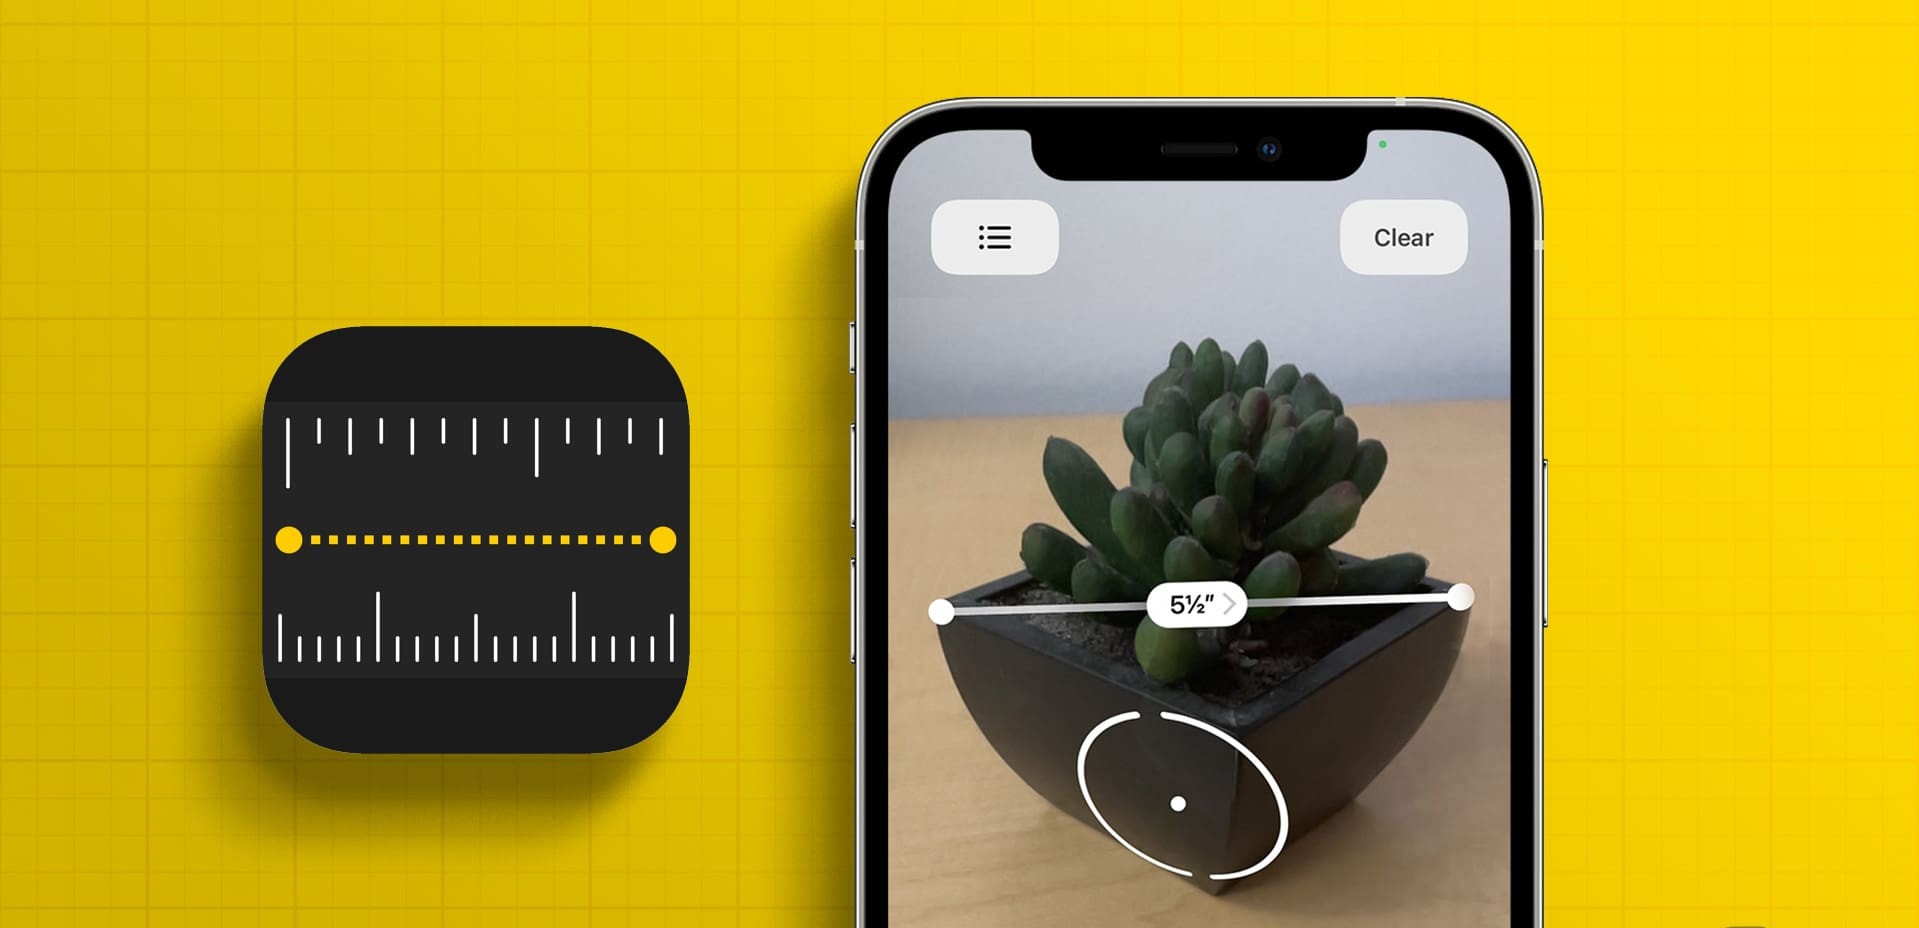 How To Use The Measure App On iPhone Or iPad